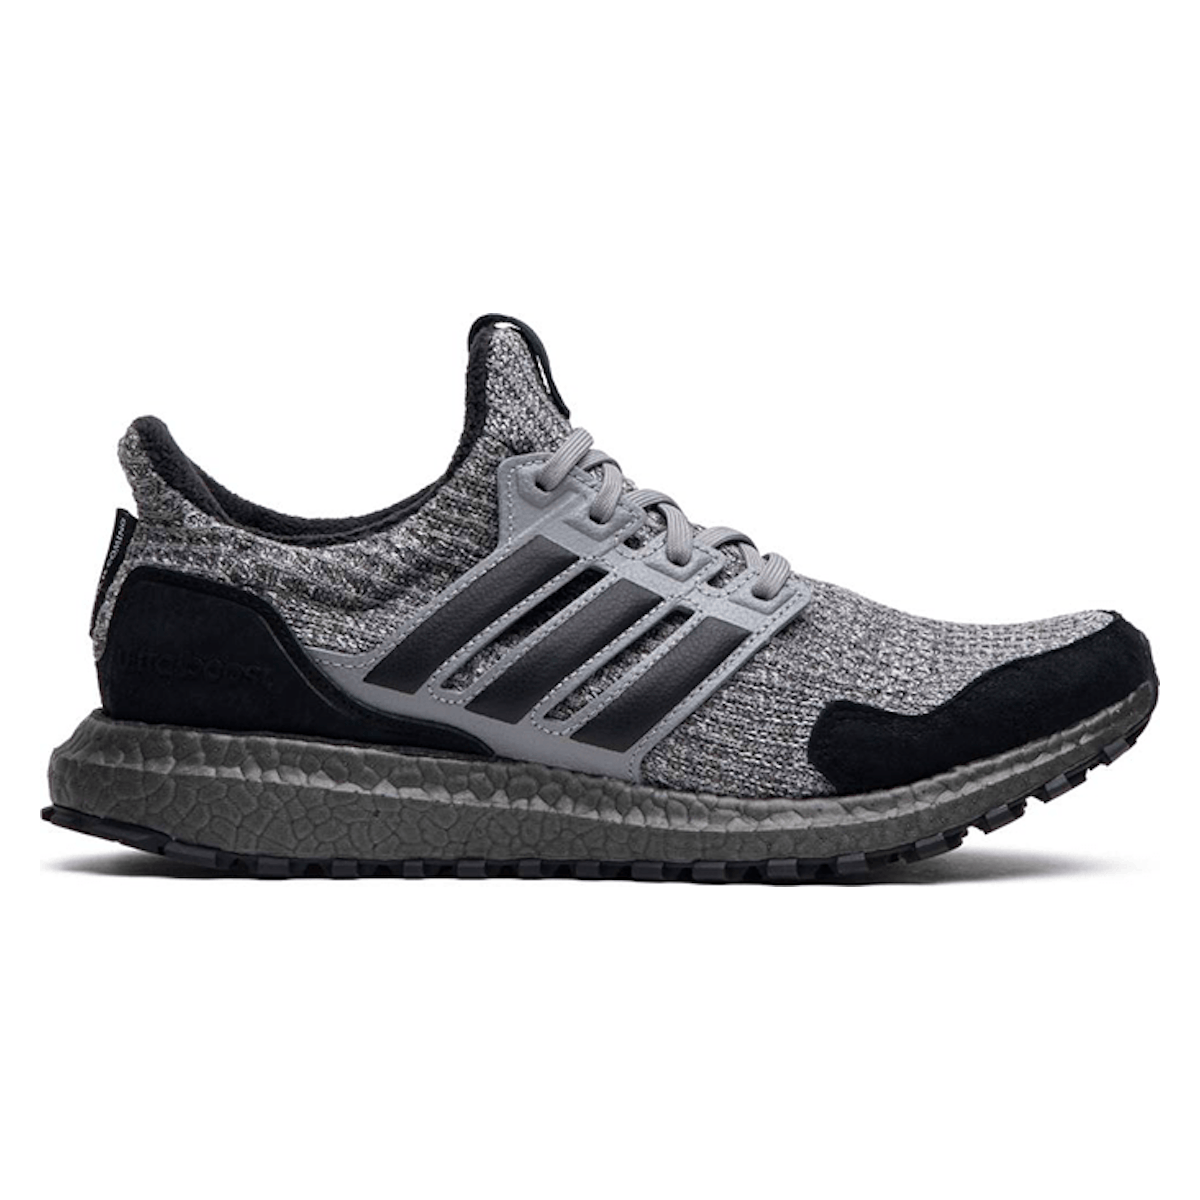 Game of Thrones x Adidas UltraBoost 4.0 "House Stark"